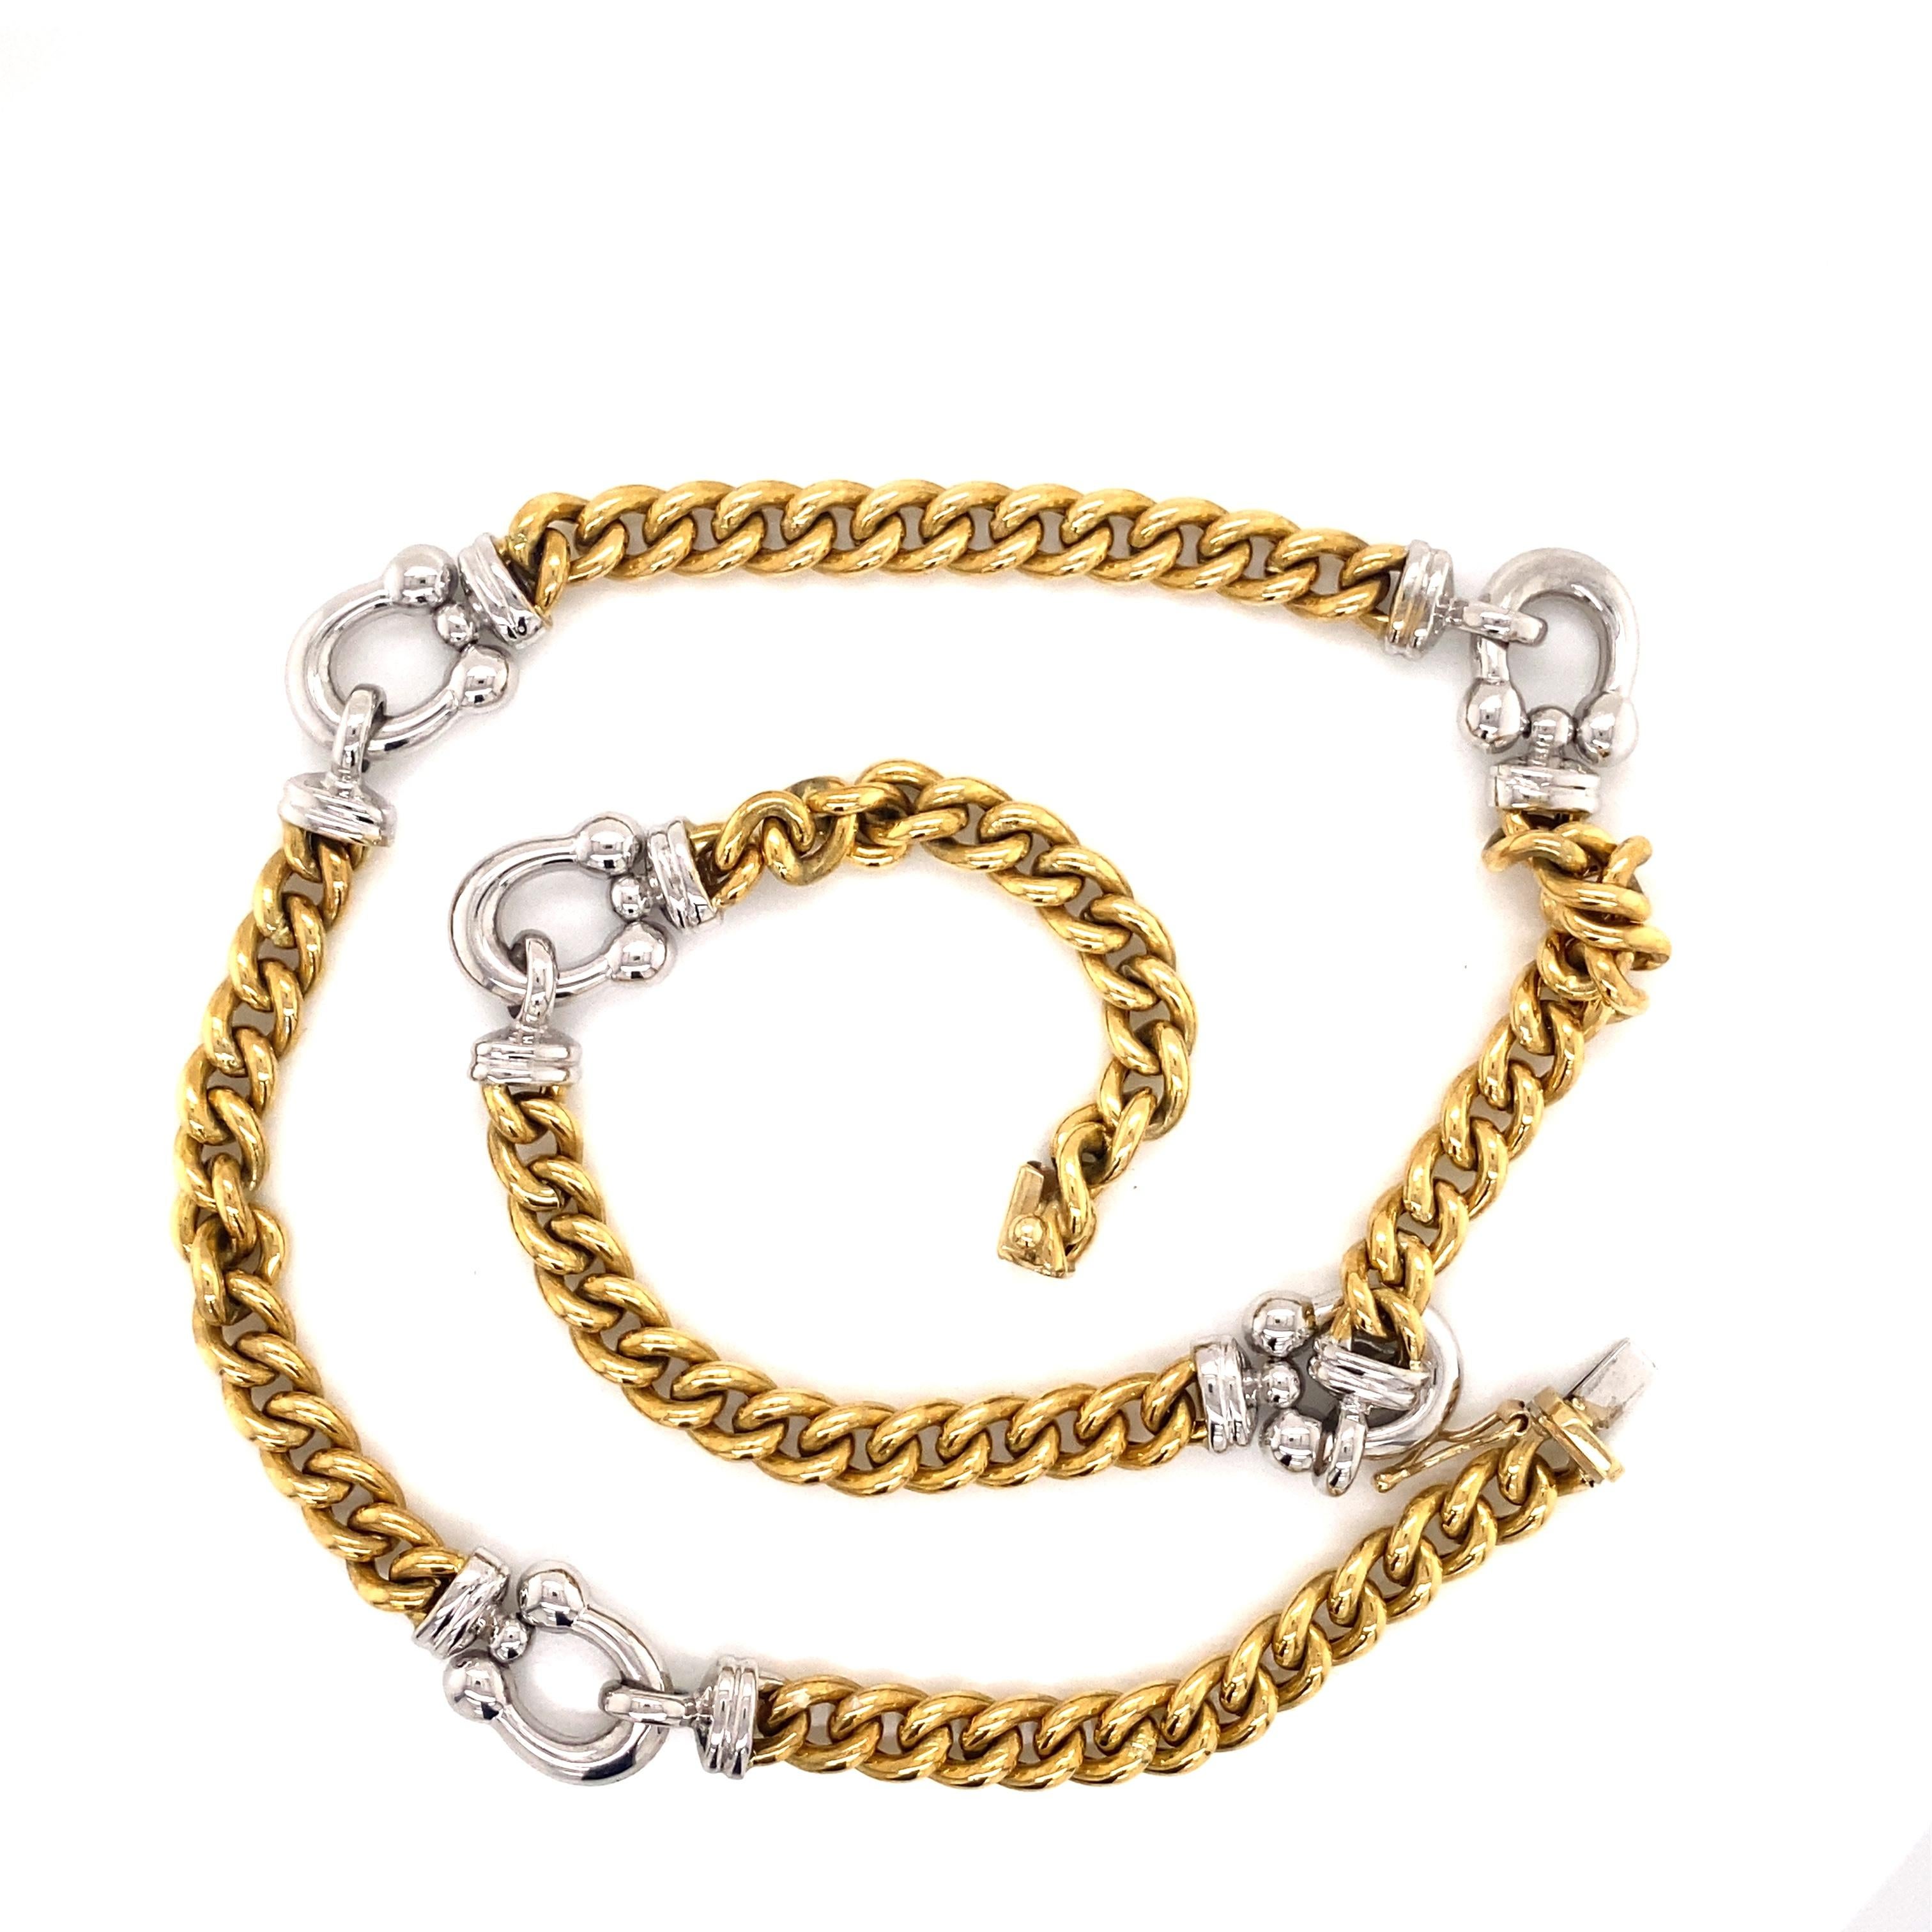 Vintage 2000's 18K Two Tone Gold Cable and Horseshoe Link Necklace - The necklace is Italian made with 18k yellow gold cable links that measure 5.7mm wide, and 18k white gold horseshoe links that measure 10.9mm wide. The necklace features a hidden